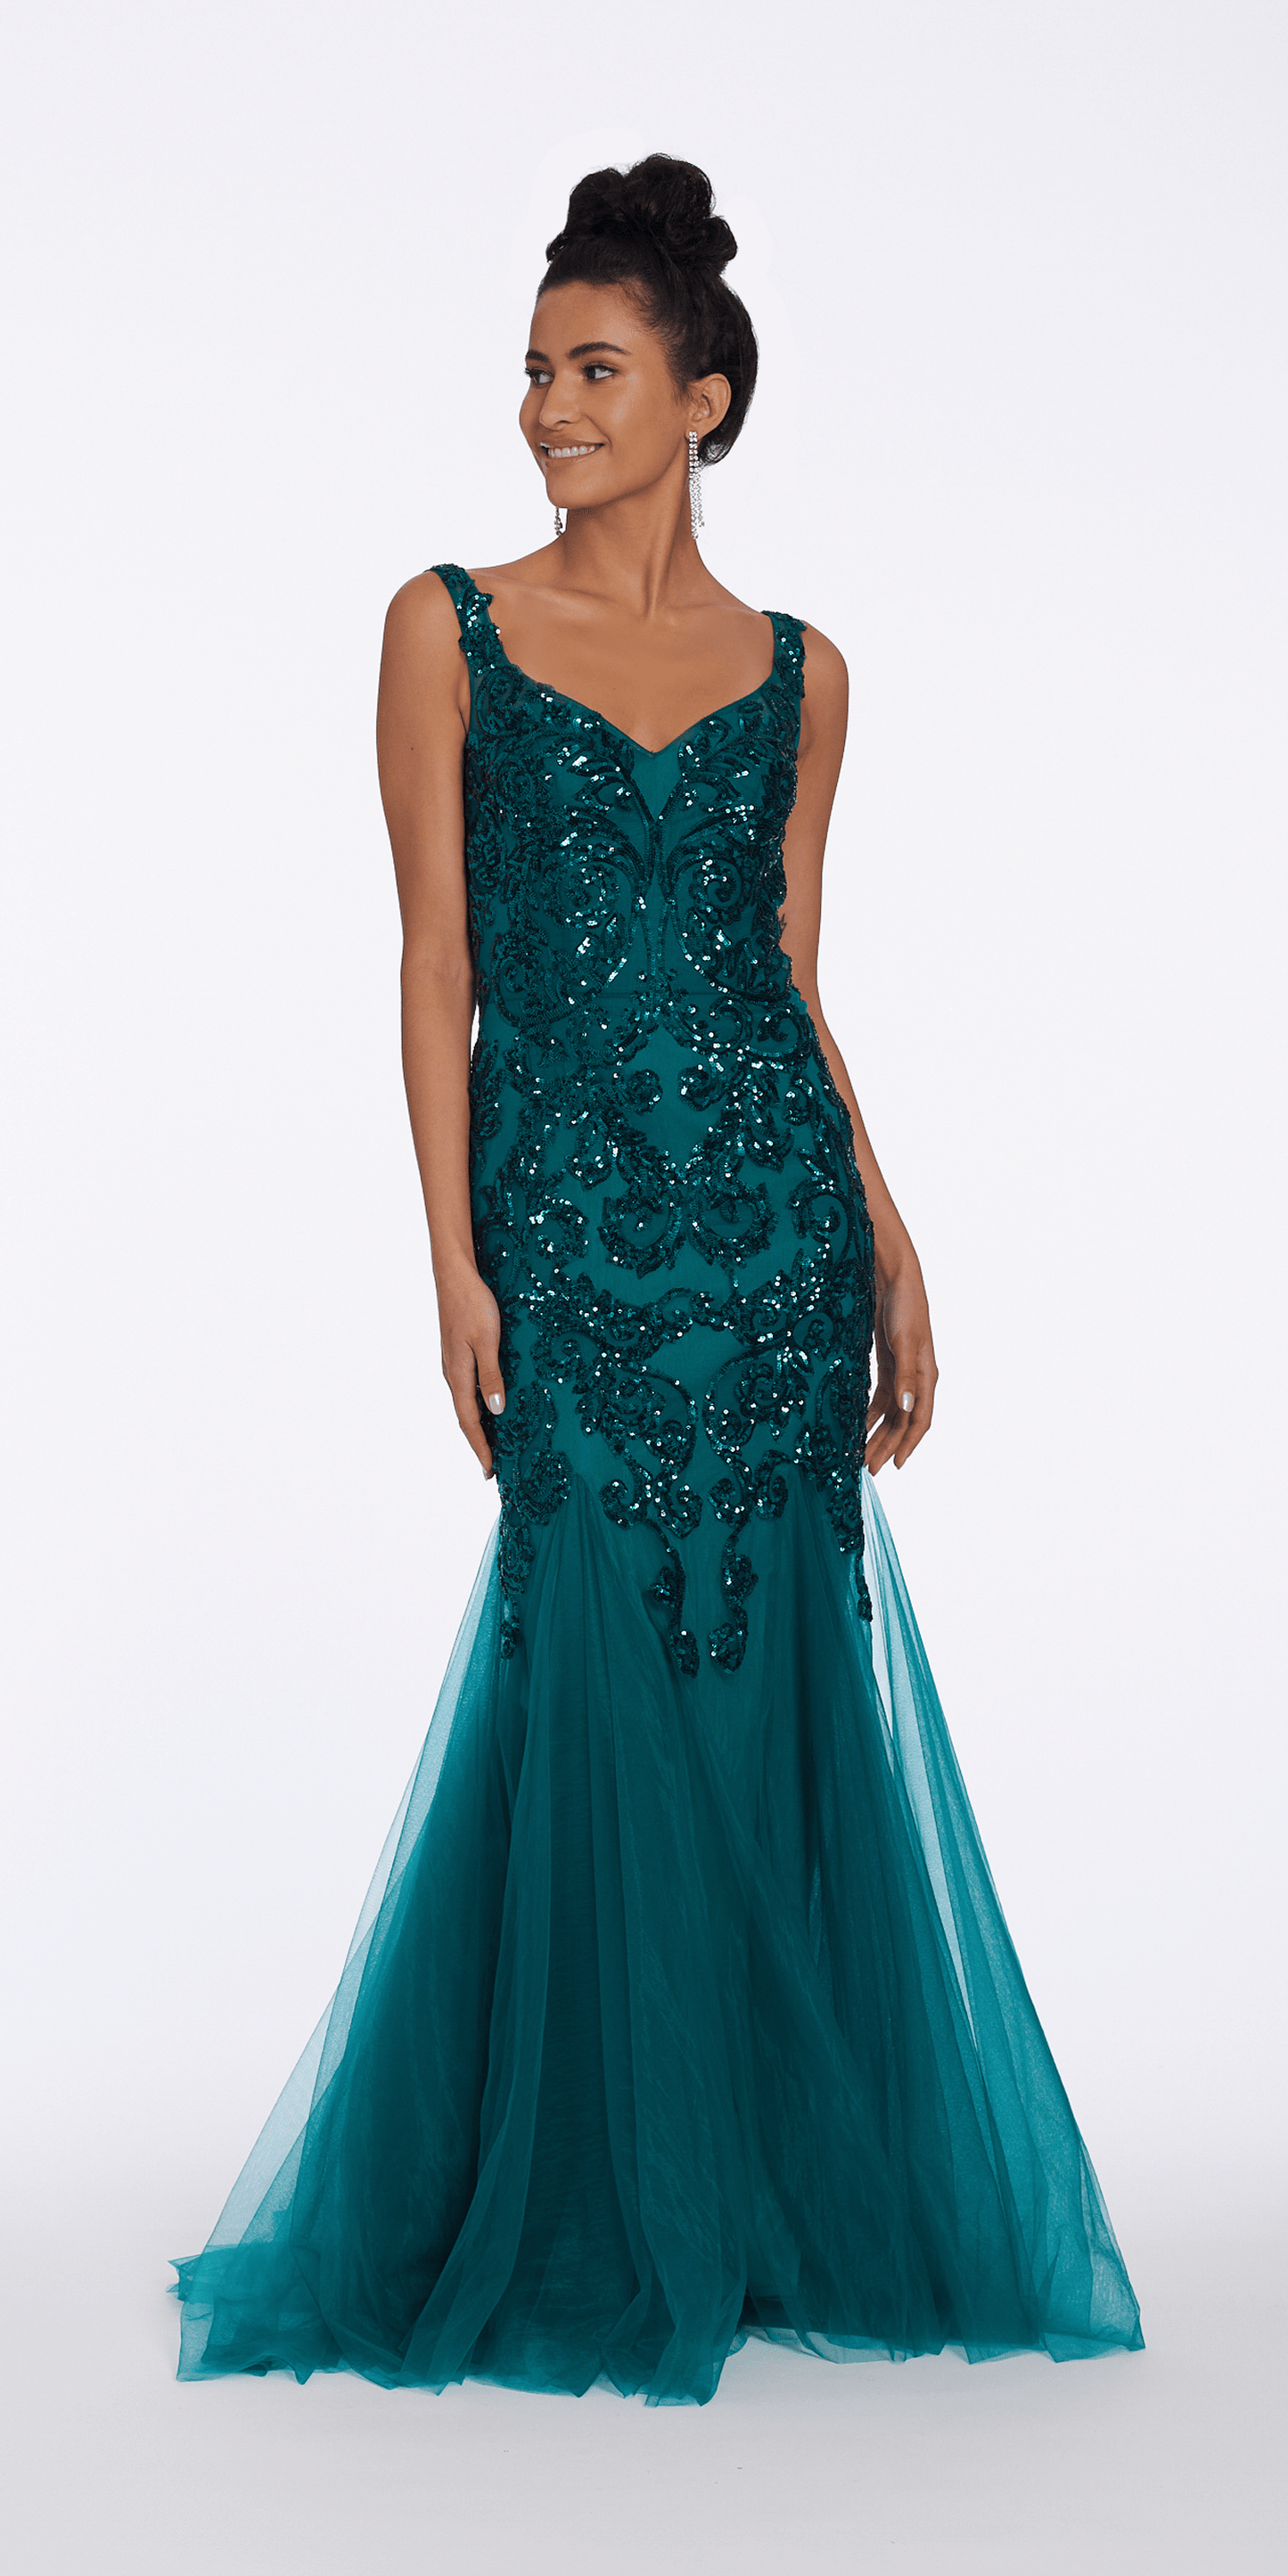 Camille La Vie Beaded Sweetheart Mermaid Dress with Godets missy / 2 / emerald